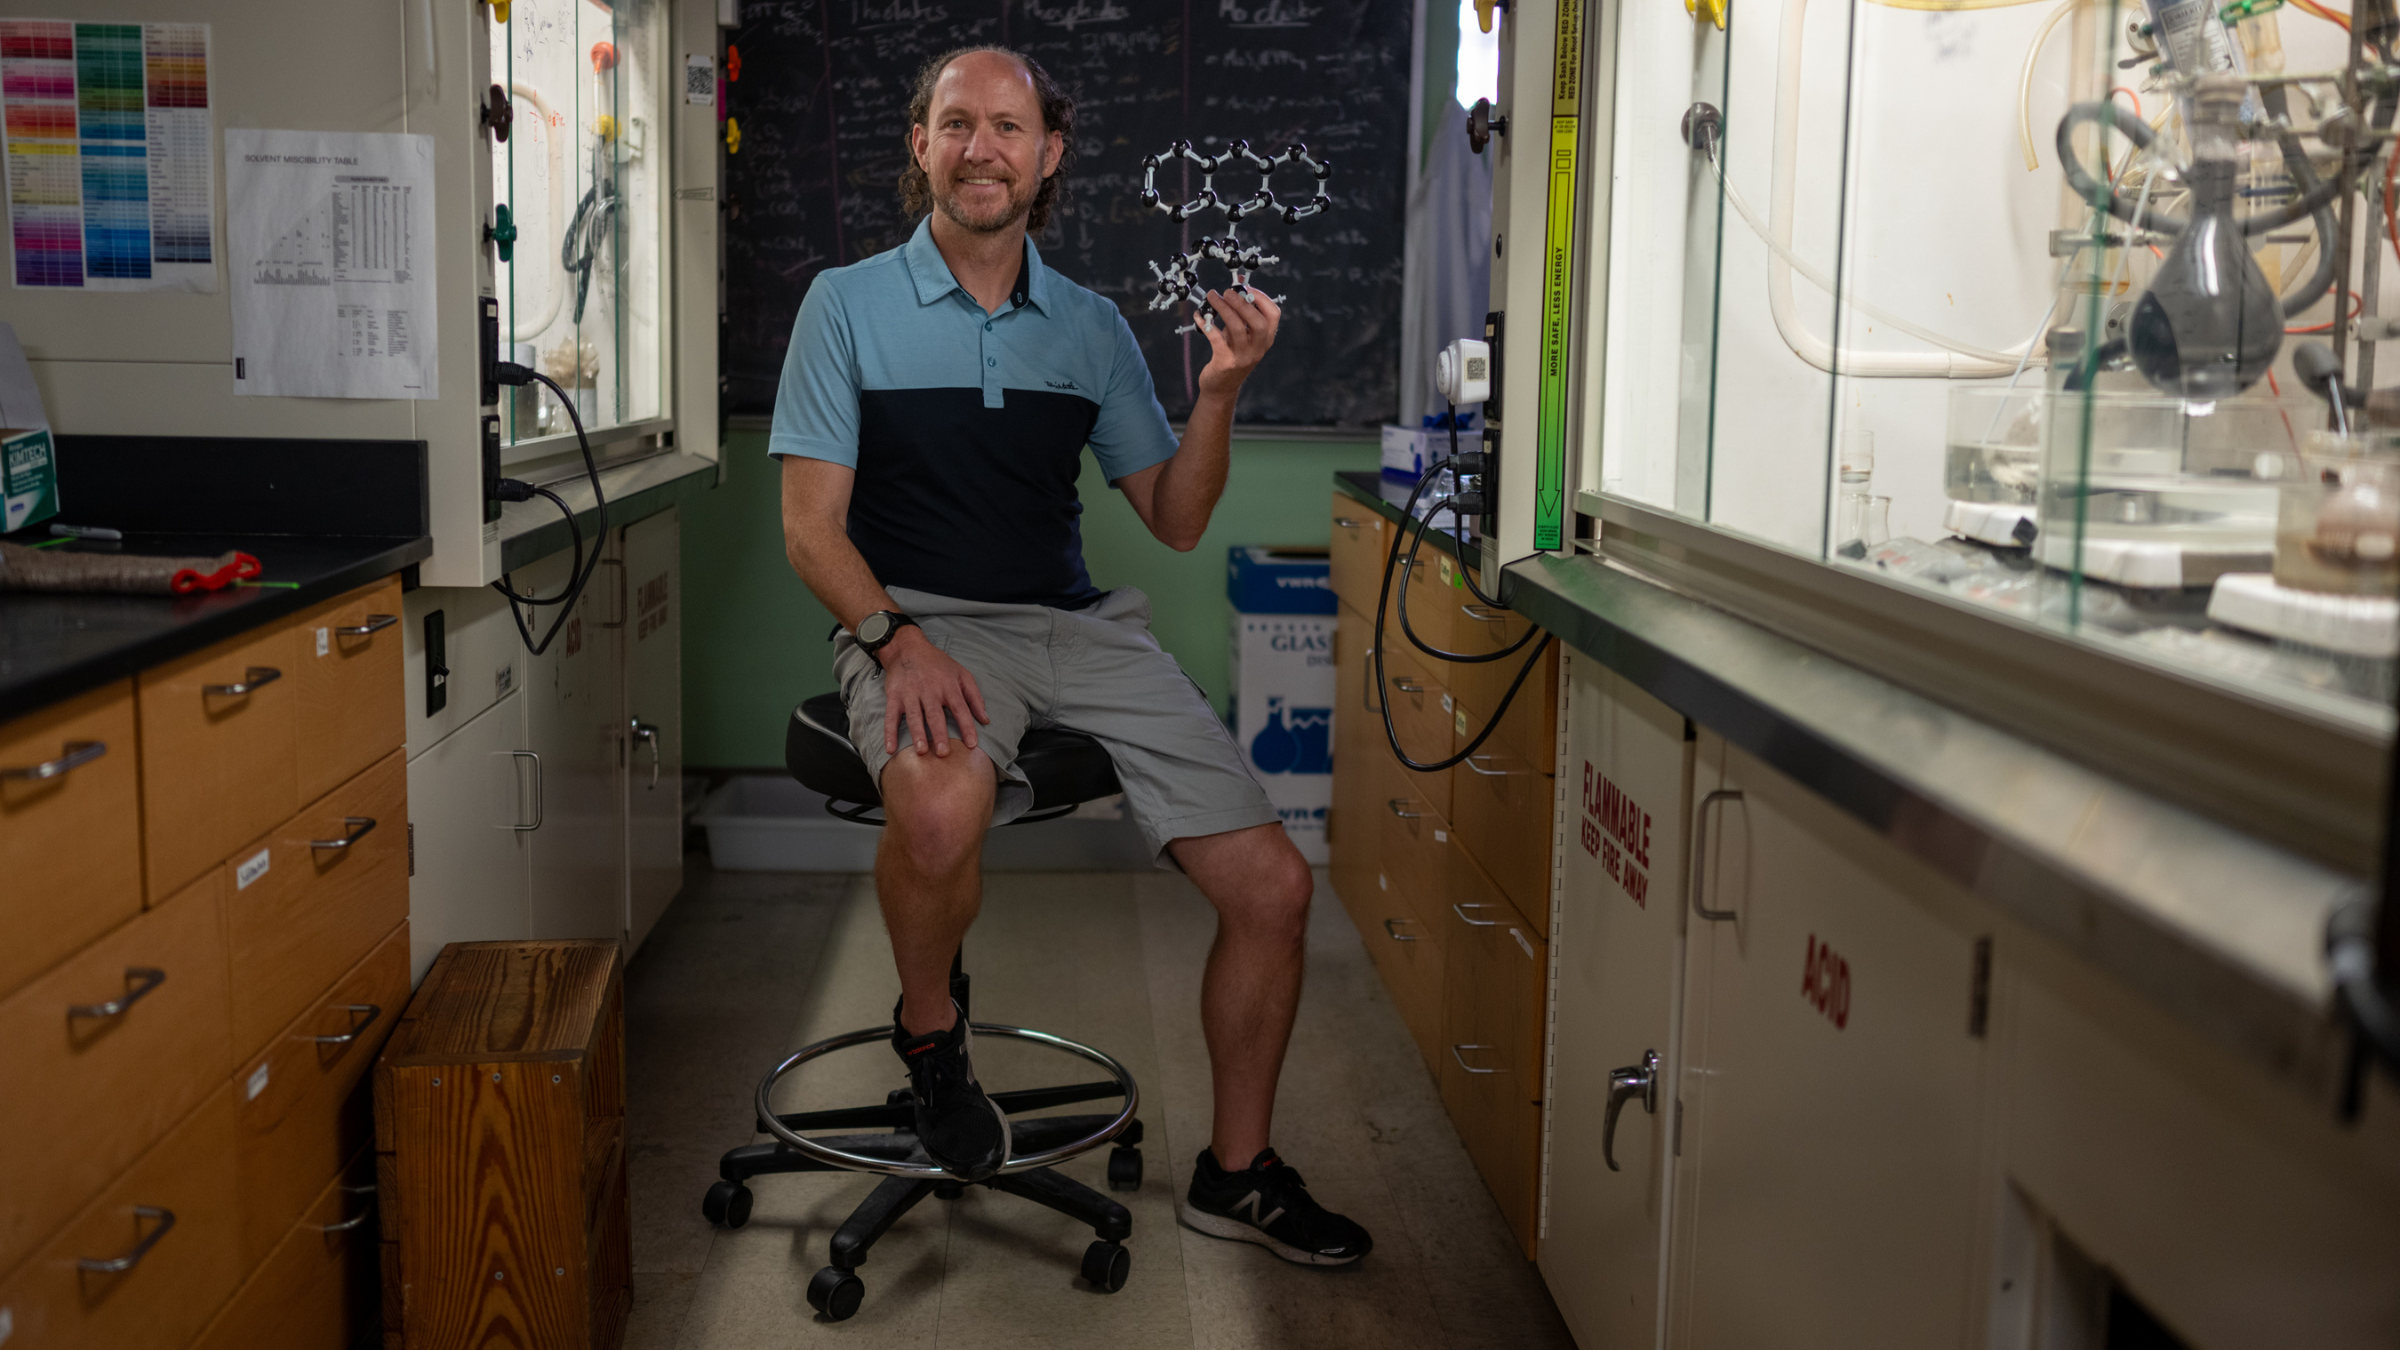 Michael Rose sits between lab benches on a rolling stool holding up a model of a molecule